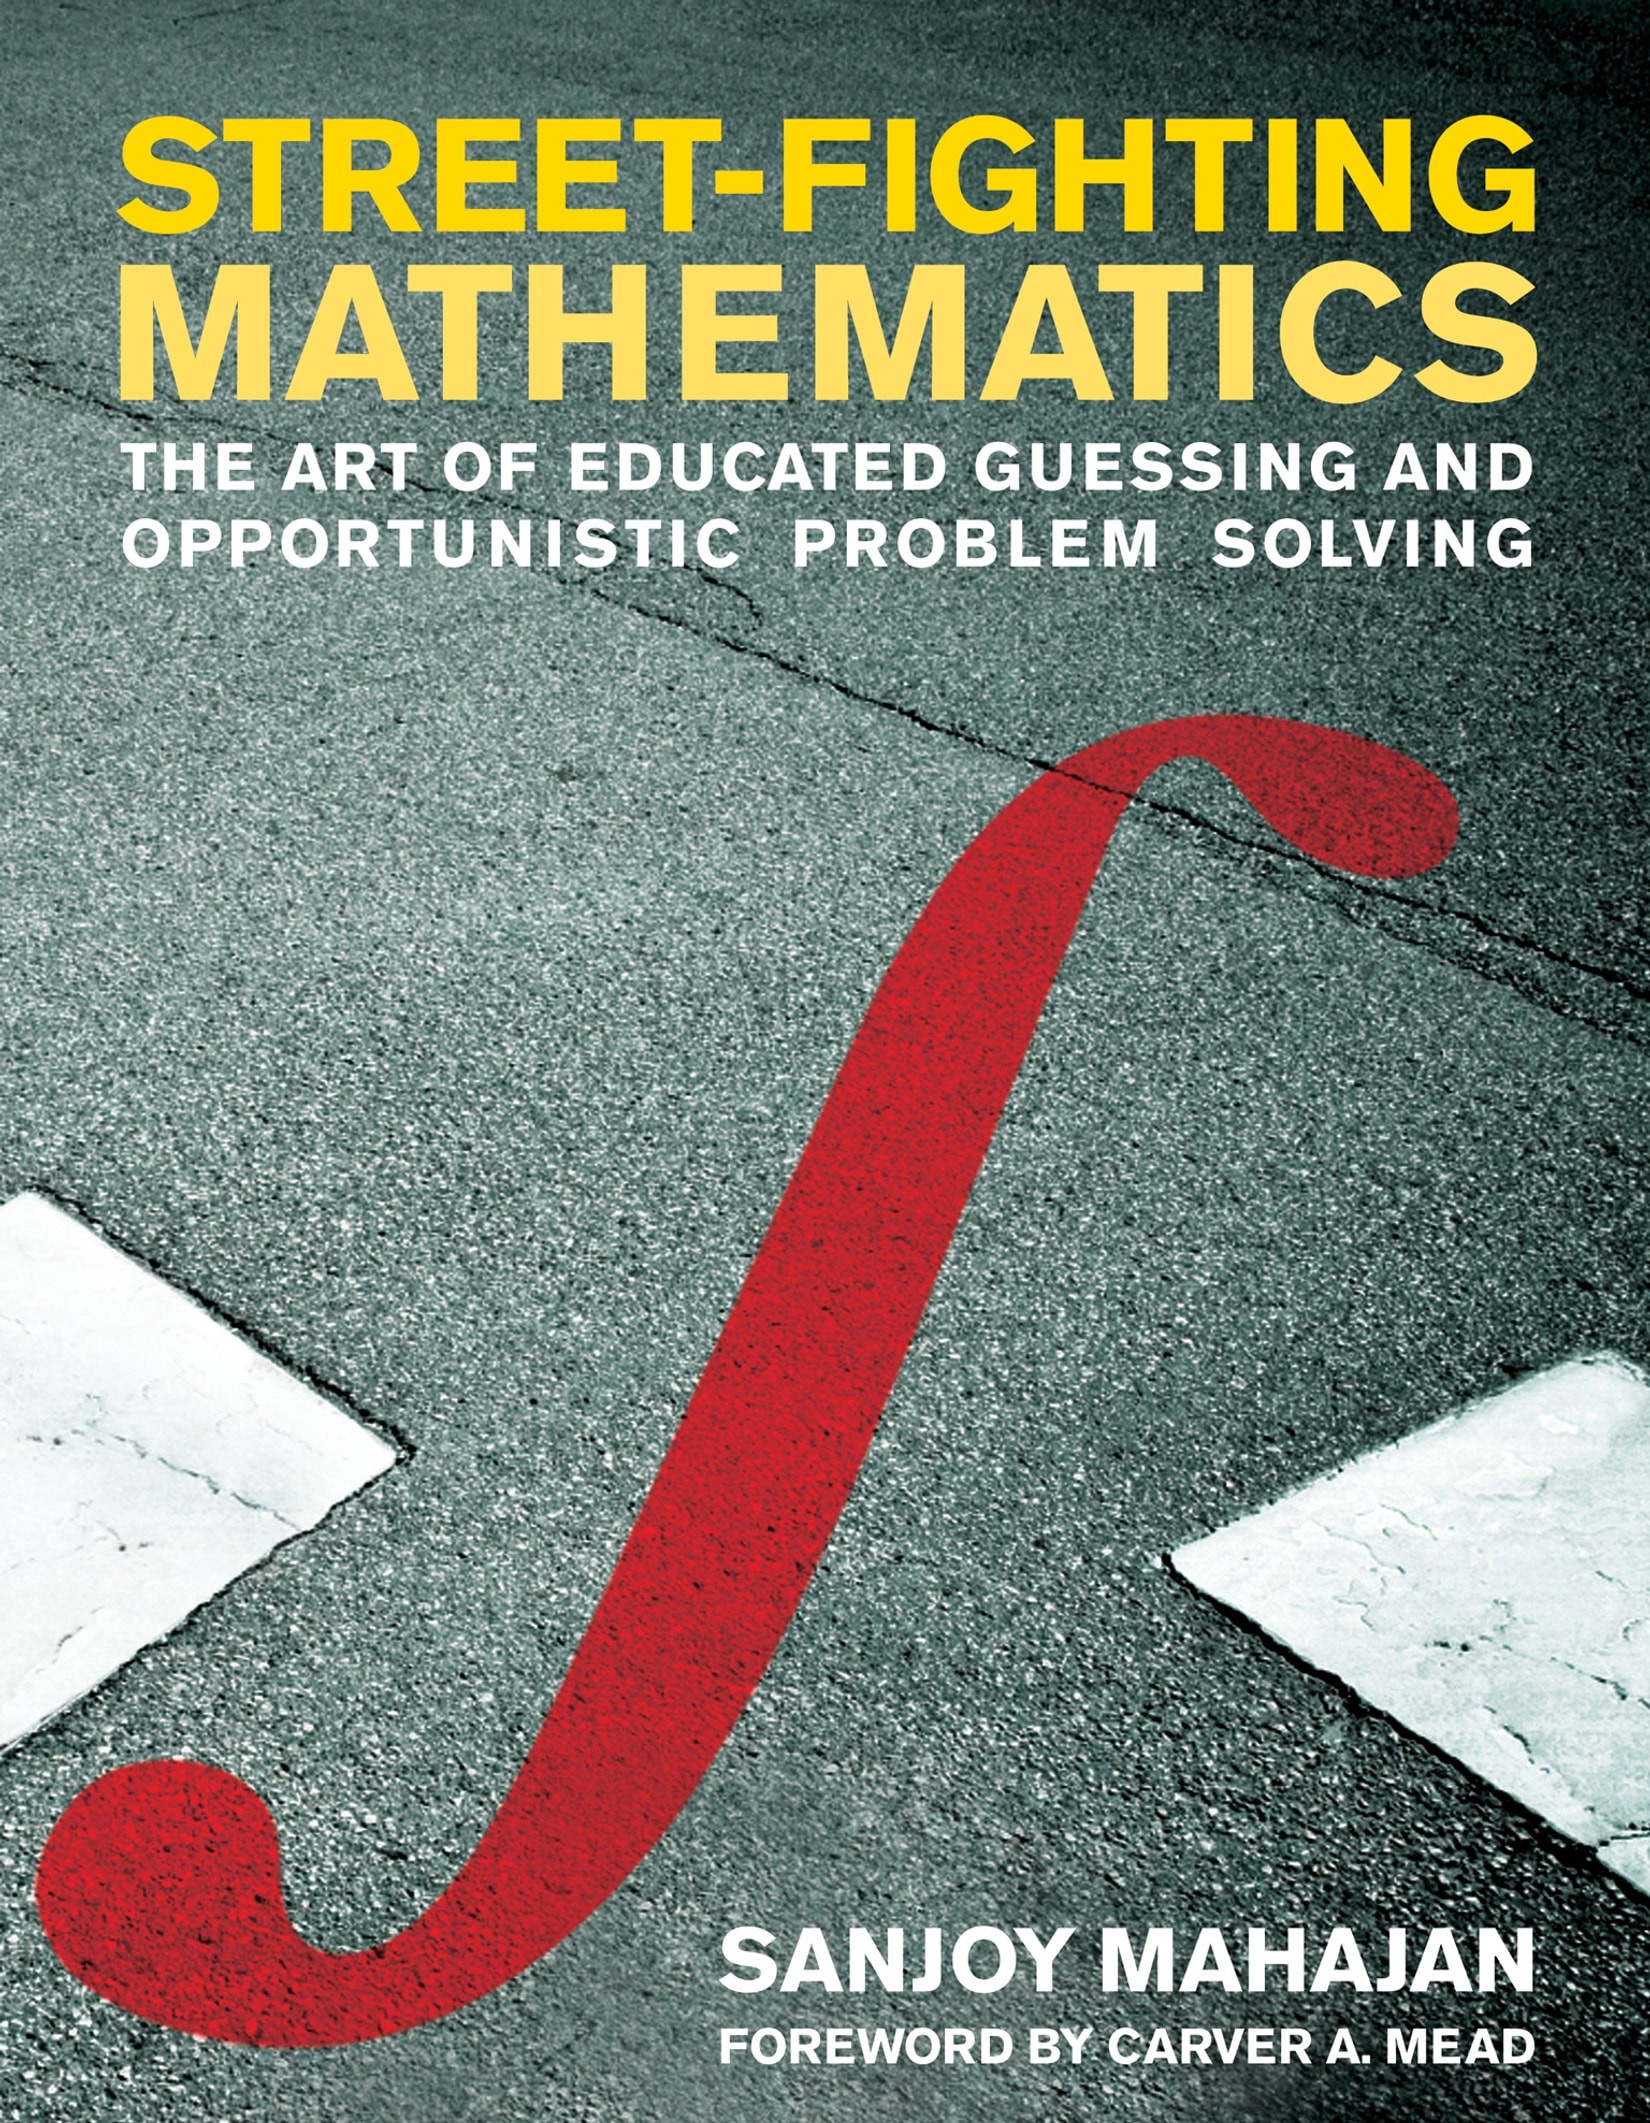 Street-Fighting Mathematics: The Art of Educated Guessing and Opportunistic Problem Solving